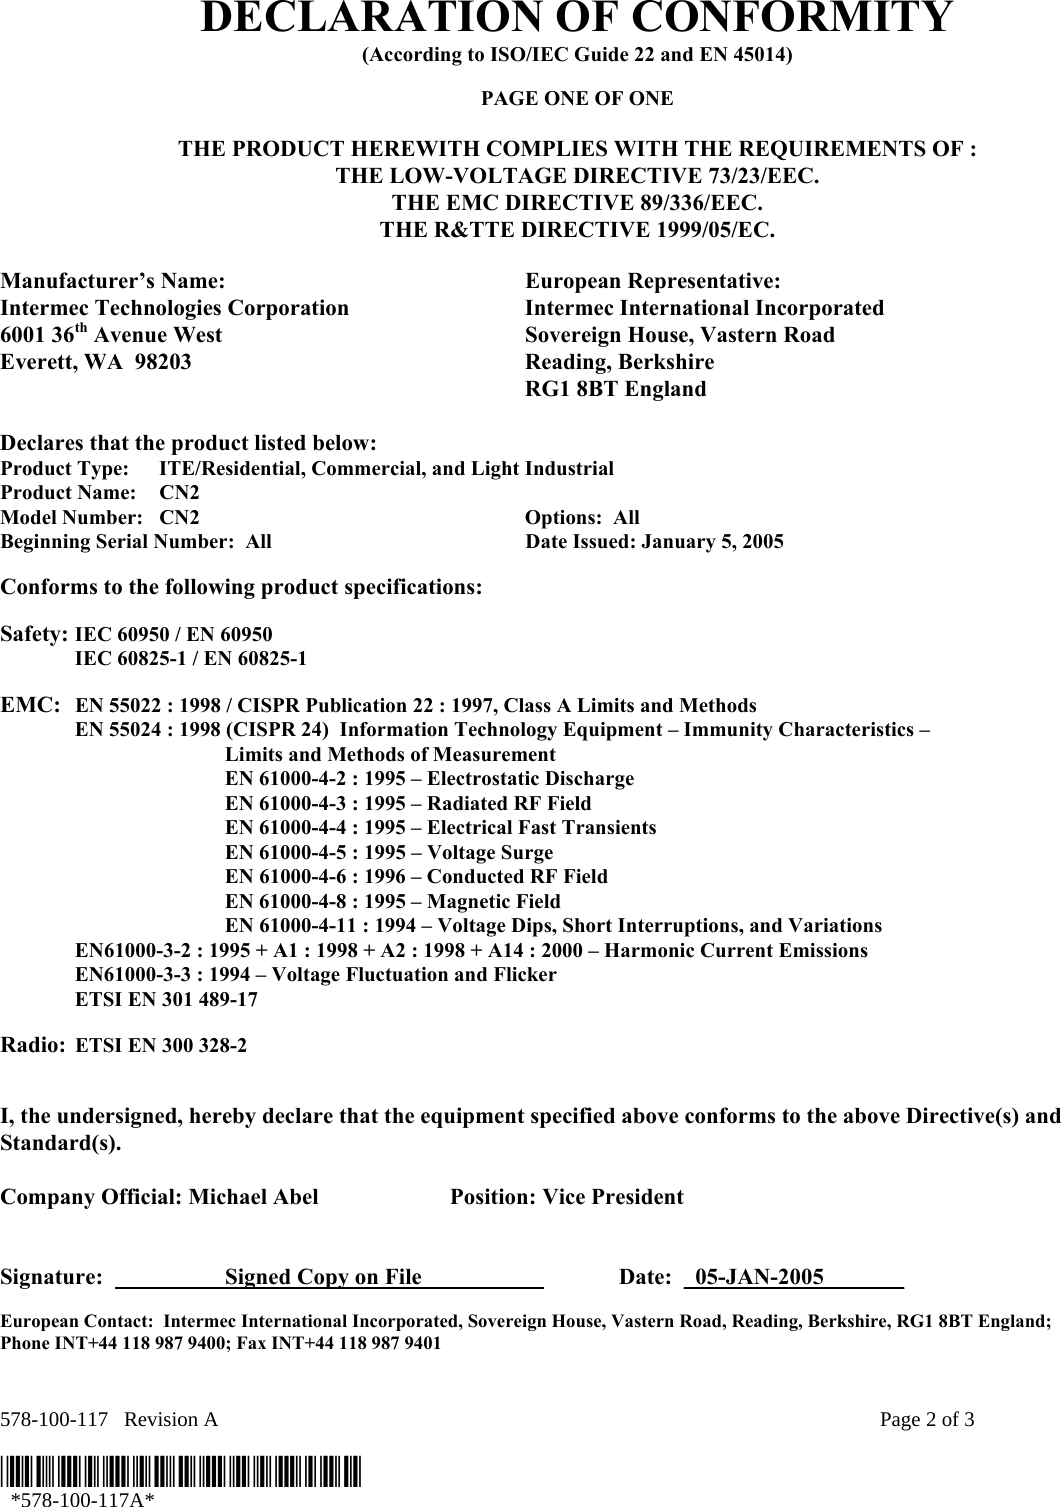 578-100-117   Revision A    Page 2 of 3  *578-100-117A*   *578-100-117A* DECLARATION OF CONFORMITY (According to ISO/IEC Guide 22 and EN 45014)  PAGE ONE OF ONE  THE PRODUCT HEREWITH COMPLIES WITH THE REQUIREMENTS OF : THE LOW-VOLTAGE DIRECTIVE 73/23/EEC. THE EMC DIRECTIVE 89/336/EEC. THE R&amp;TTE DIRECTIVE 1999/05/EC.  Manufacturer’s Name:  European Representative: Intermec Technologies Corporation  Intermec International Incorporated 6001 36th Avenue West  Sovereign House, Vastern Road Everett, WA  98203  Reading, Berkshire   RG1 8BT England  Declares that the product listed below: Product Type:  ITE/Residential, Commercial, and Light Industrial Product Name:    CN2 Model Number:  CN2    Options:  All   Beginning Serial Number:  All  Date Issued: January 5, 2005  Conforms to the following product specifications:   Safety: IEC 60950 / EN 60950   IEC 60825-1 / EN 60825-1    EMC:  EN 55022 : 1998 / CISPR Publication 22 : 1997, Class A Limits and Methods   EN 55024 : 1998 (CISPR 24)  Information Technology Equipment – Immunity Characteristics –        Limits and Methods of Measurement     EN 61000-4-2 : 1995 – Electrostatic Discharge     EN 61000-4-3 : 1995 – Radiated RF Field     EN 61000-4-4 : 1995 – Electrical Fast Transients     EN 61000-4-5 : 1995 – Voltage Surge     EN 61000-4-6 : 1996 – Conducted RF Field     EN 61000-4-8 : 1995 – Magnetic Field     EN 61000-4-11 : 1994 – Voltage Dips, Short Interruptions, and Variations   EN61000-3-2 : 1995 + A1 : 1998 + A2 : 1998 + A14 : 2000 – Harmonic Current Emissions   EN61000-3-3 : 1994 – Voltage Fluctuation and Flicker   ETSI EN 301 489-17   Radio: ETSI EN 300 328-2      I, the undersigned, hereby declare that the equipment specified above conforms to the above Directive(s) and Standard(s).  Company Official: Michael Abel  Position: Vice President   Signature:    Signed Copy on File      Date:  _05-JAN-2005_______  European Contact:  Intermec International Incorporated, Sovereign House, Vastern Road, Reading, Berkshire, RG1 8BT England;  Phone INT+44 118 987 9400; Fax INT+44 118 987 9401  